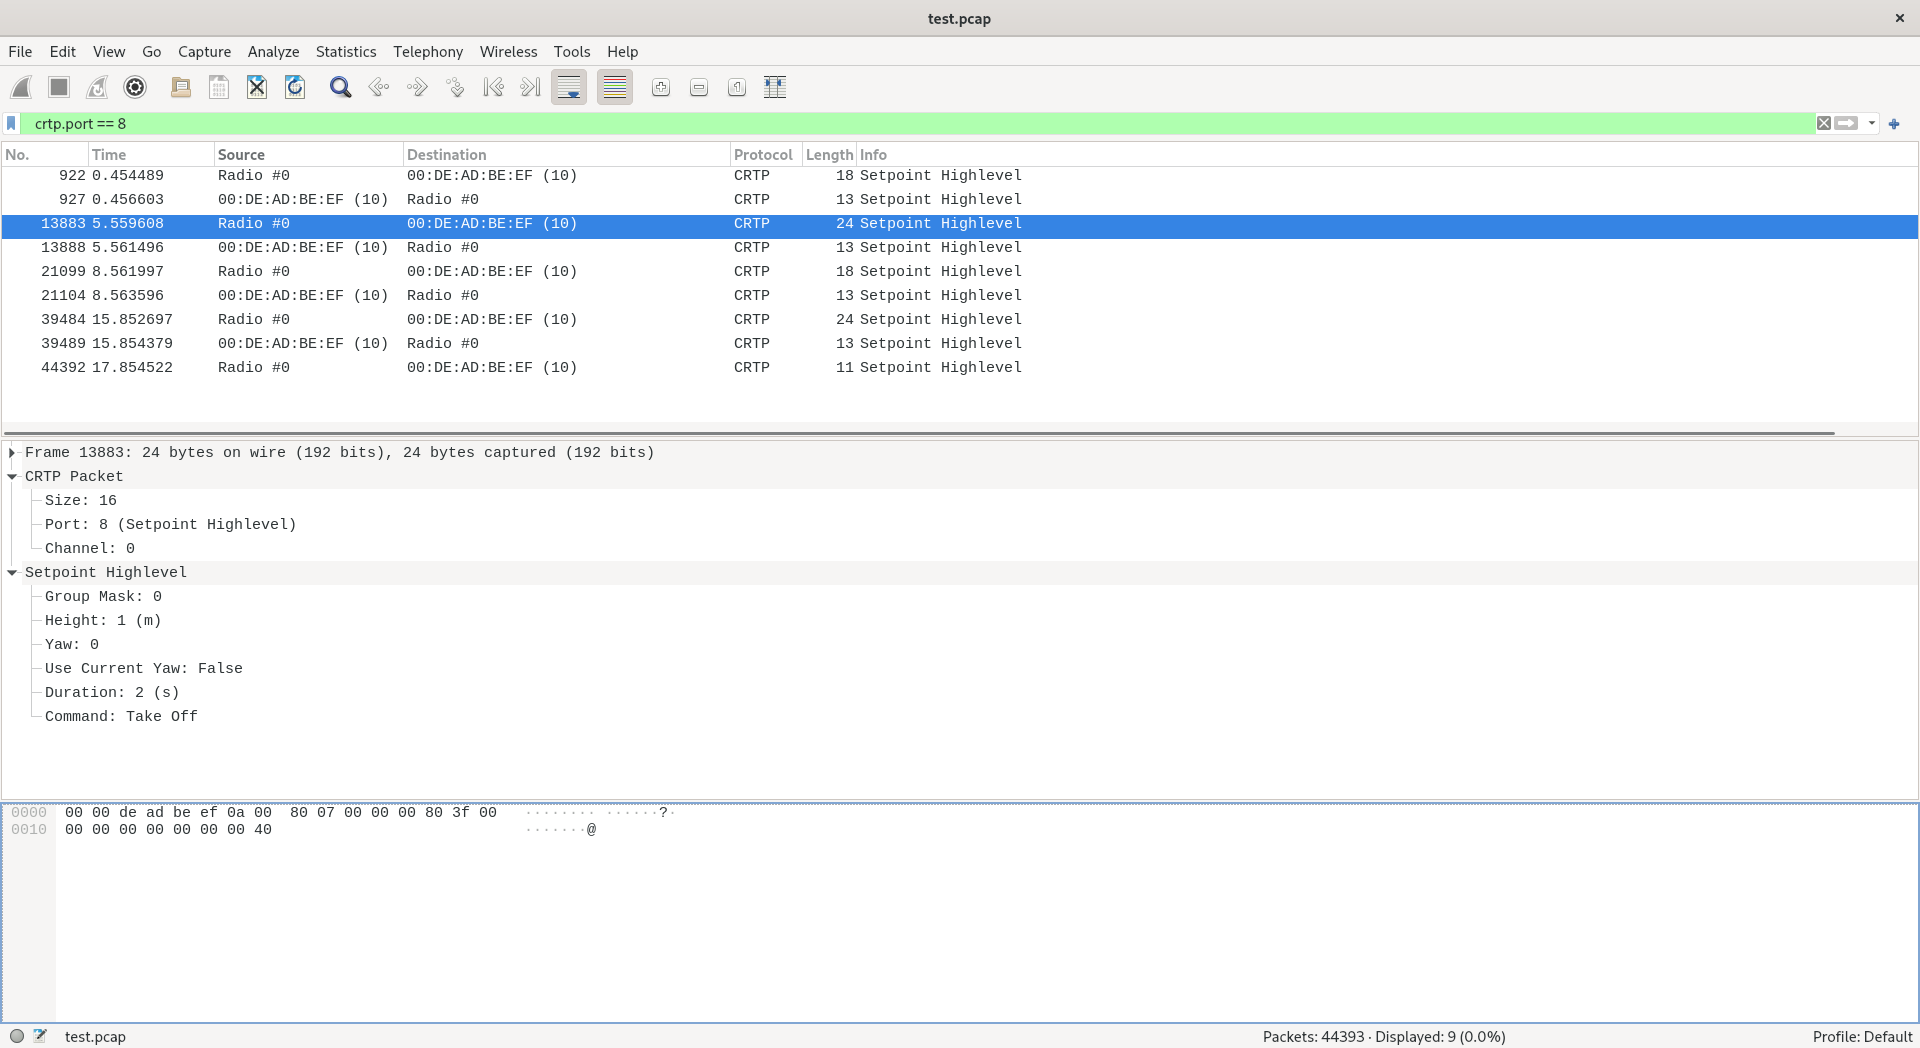 Image of CRTP dissector in Wireshark